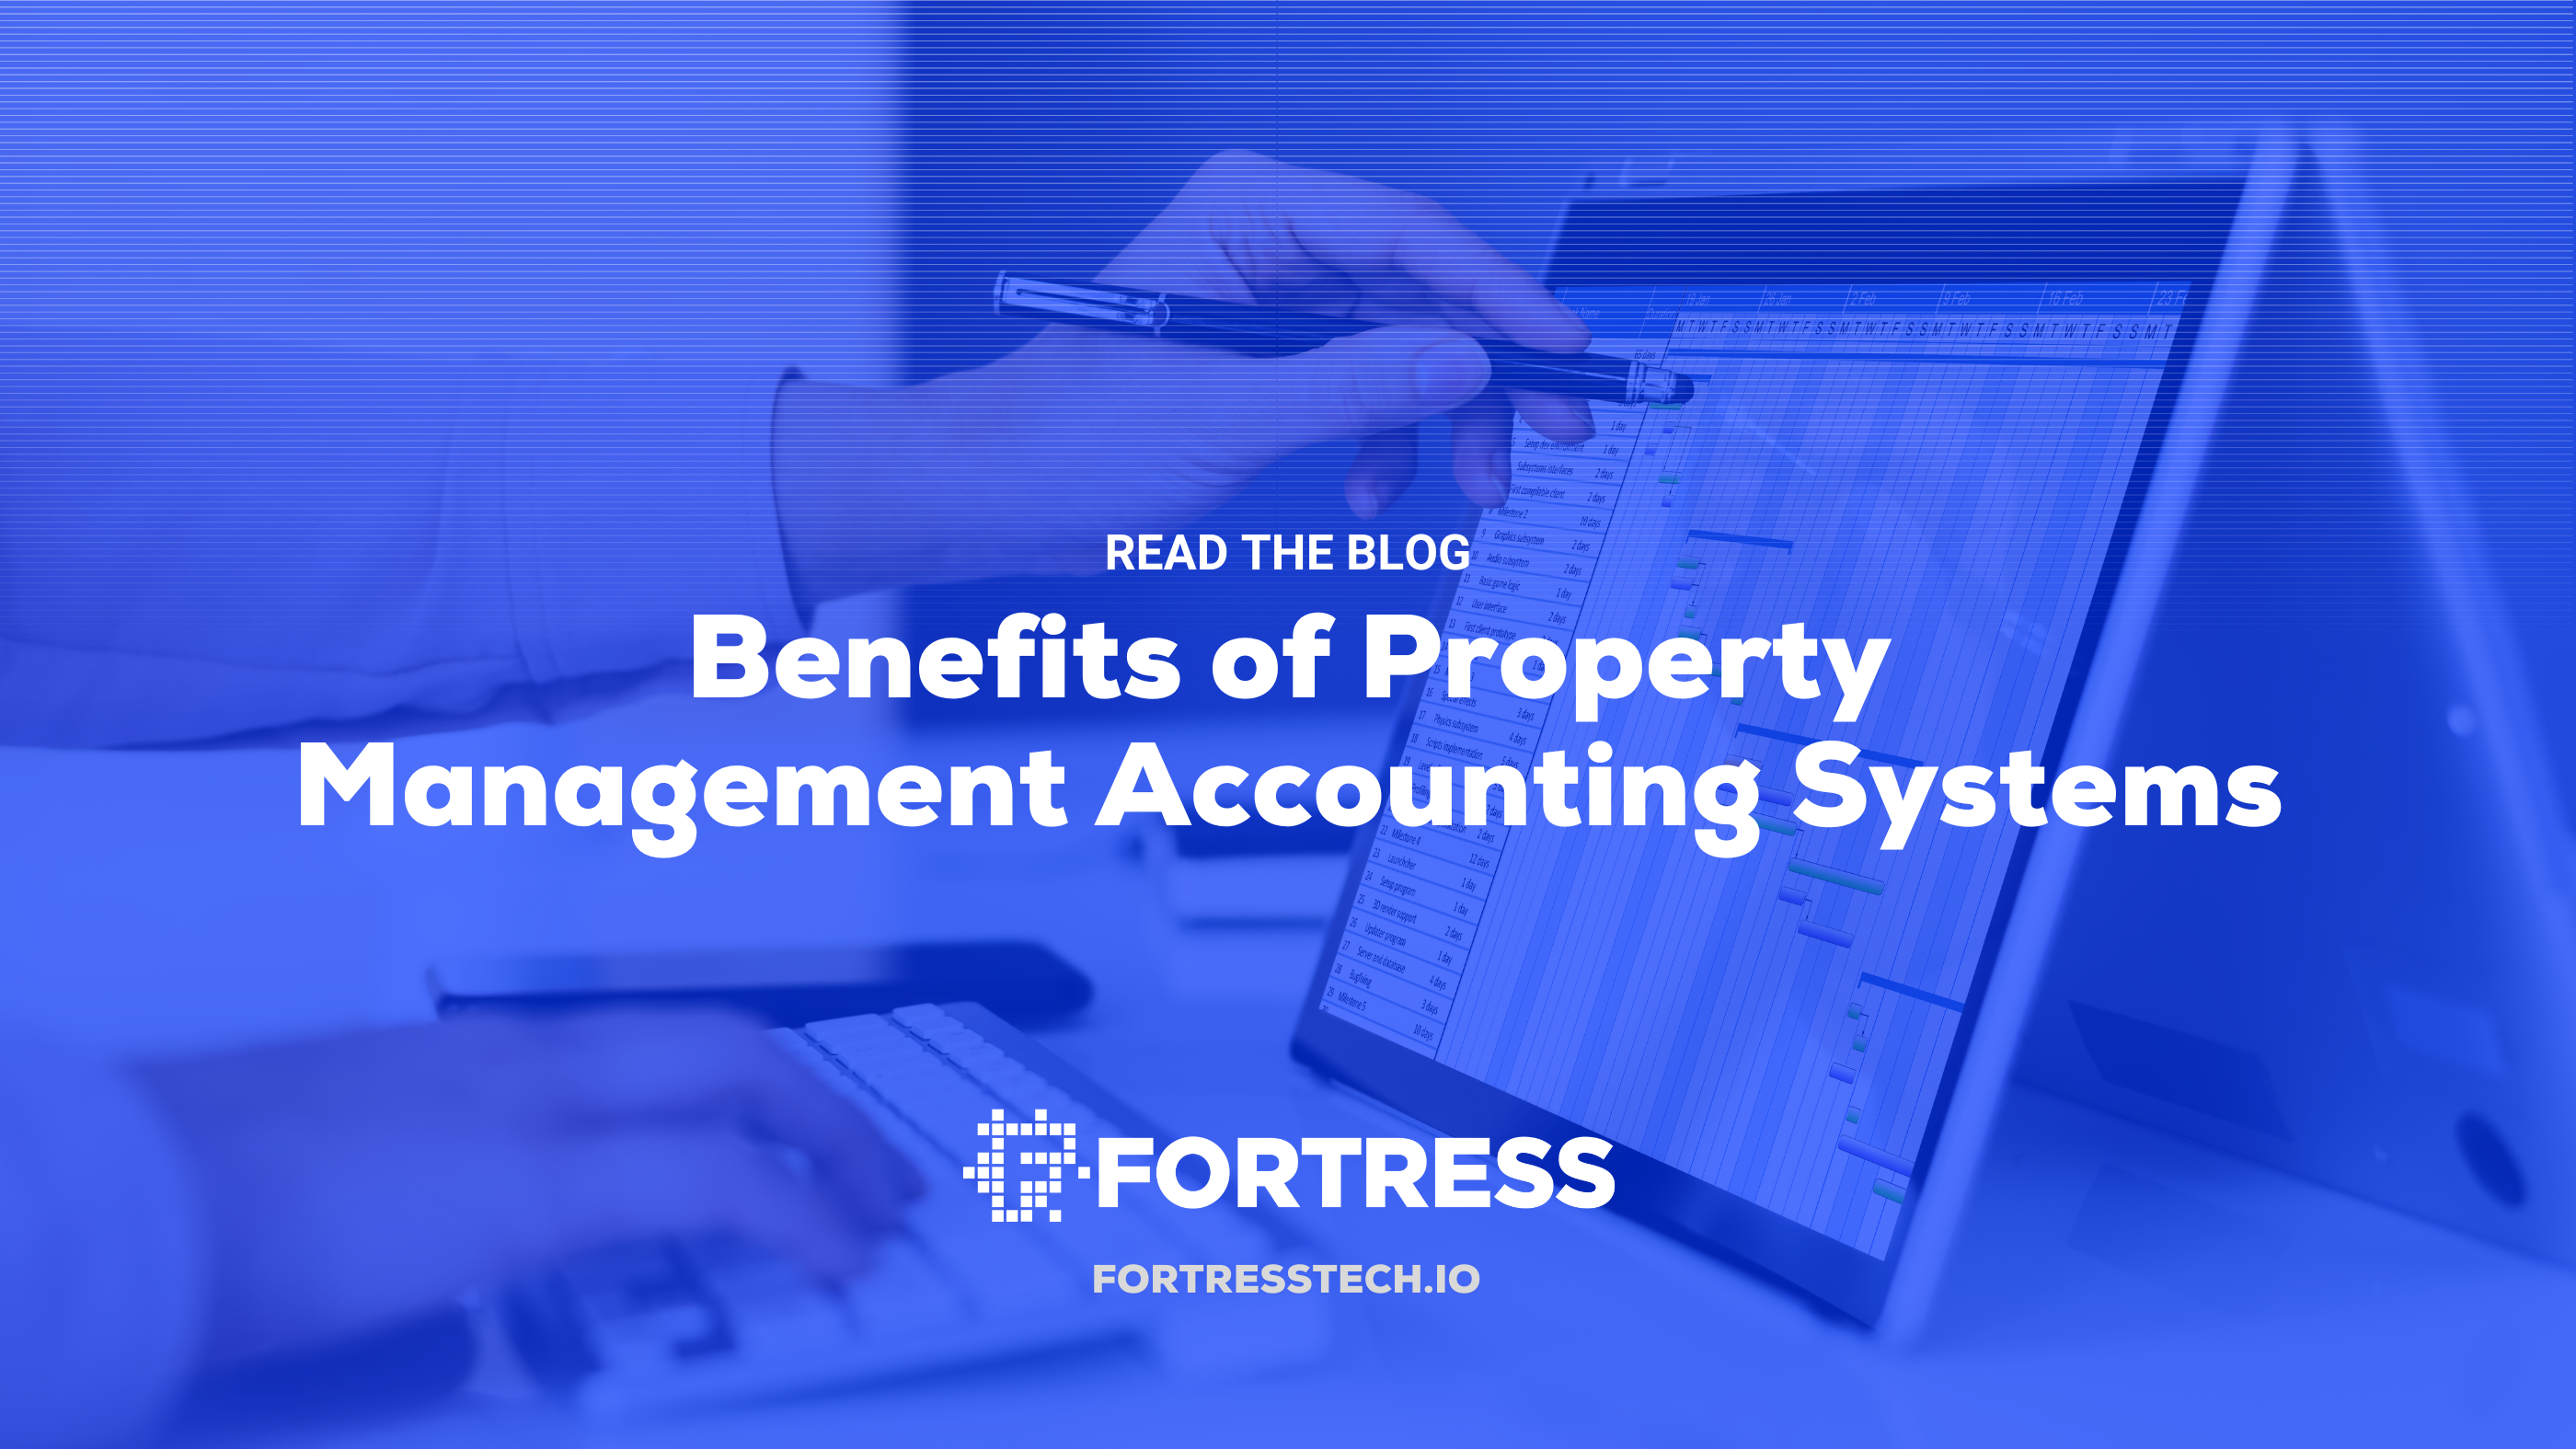 Benefits of Property Management Accounting Systems